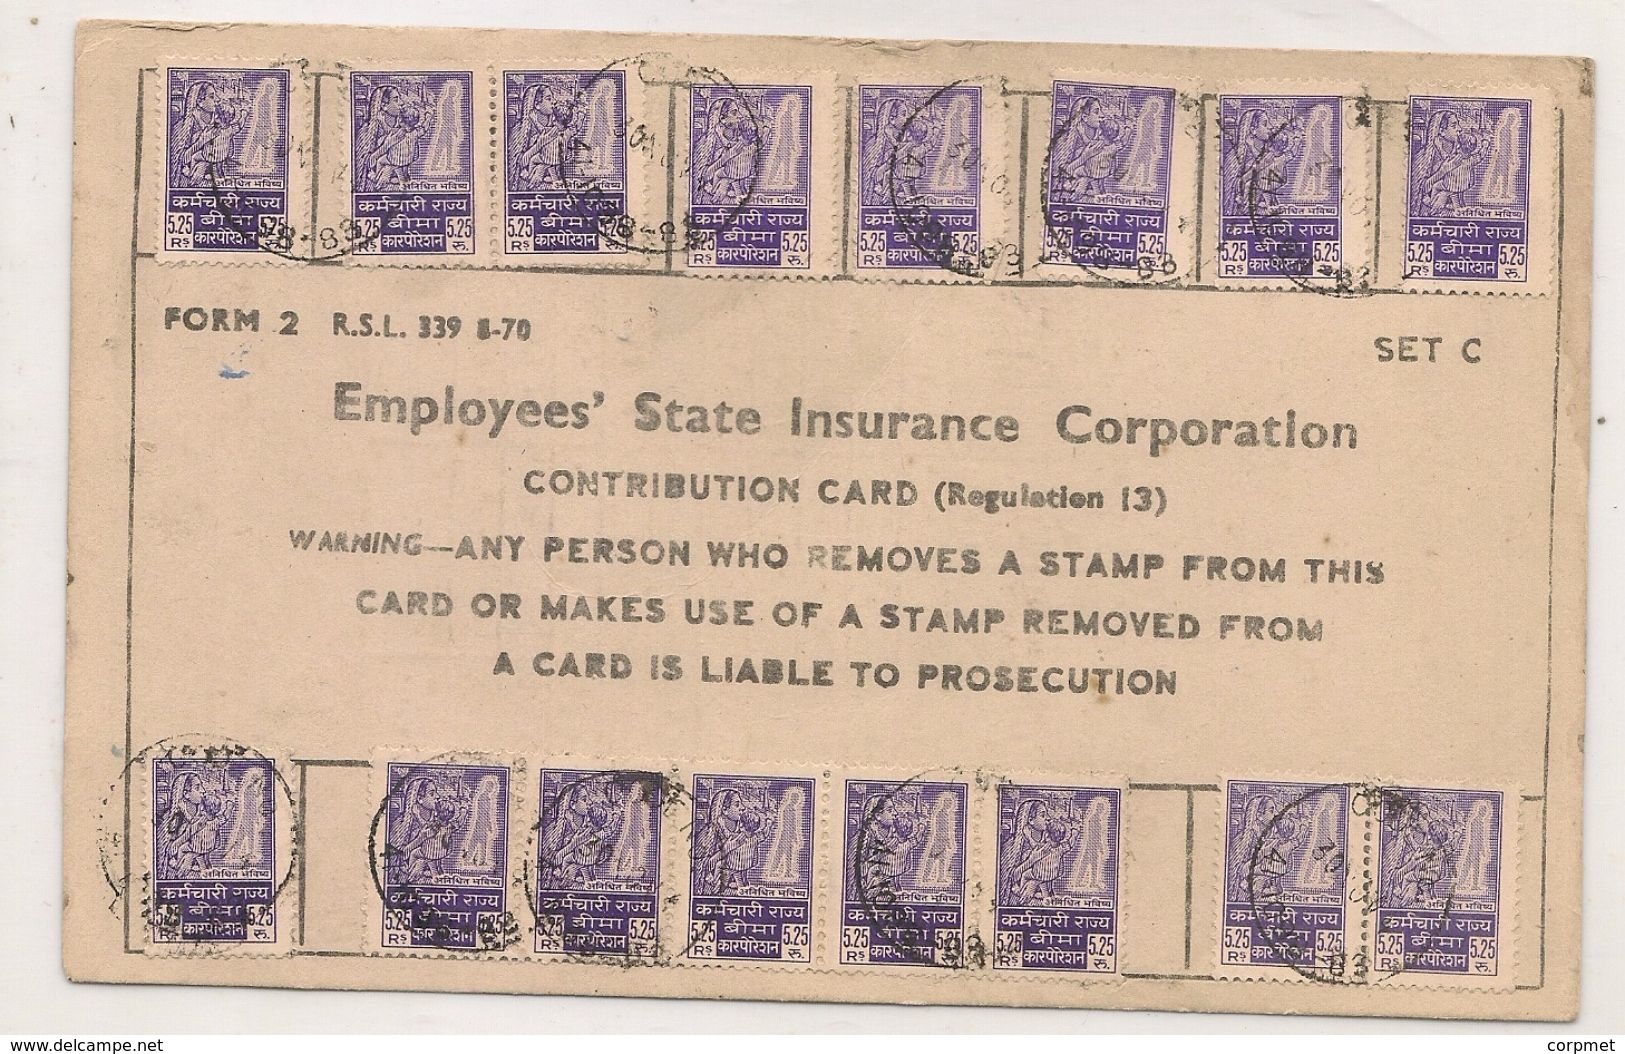 UK - EMPLOYEES STATE INSURANCE CORPORATION - 1974 Contribution Card - SHALIMAR Local Office - - Revenue Stamps